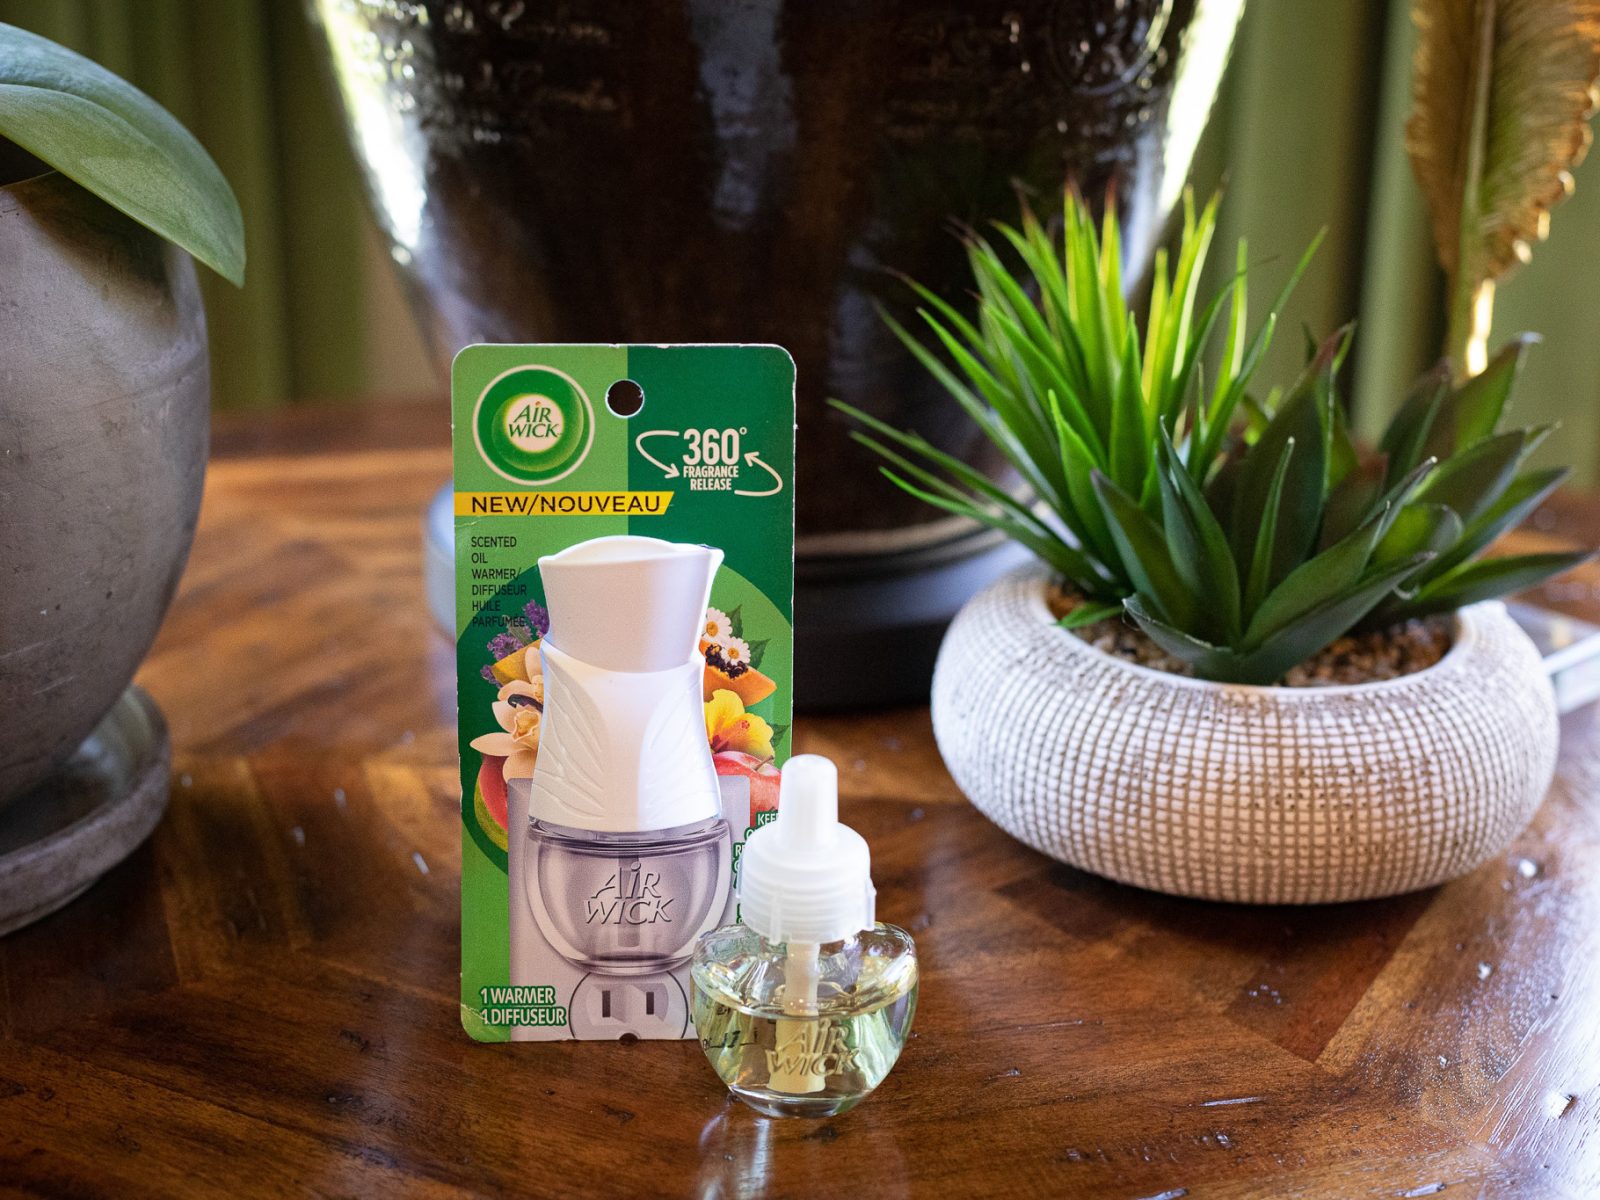 Air Wick Scented Oil Warmers 2-Pack Just $1.70 At Kroger – 85¢ Per Warmer